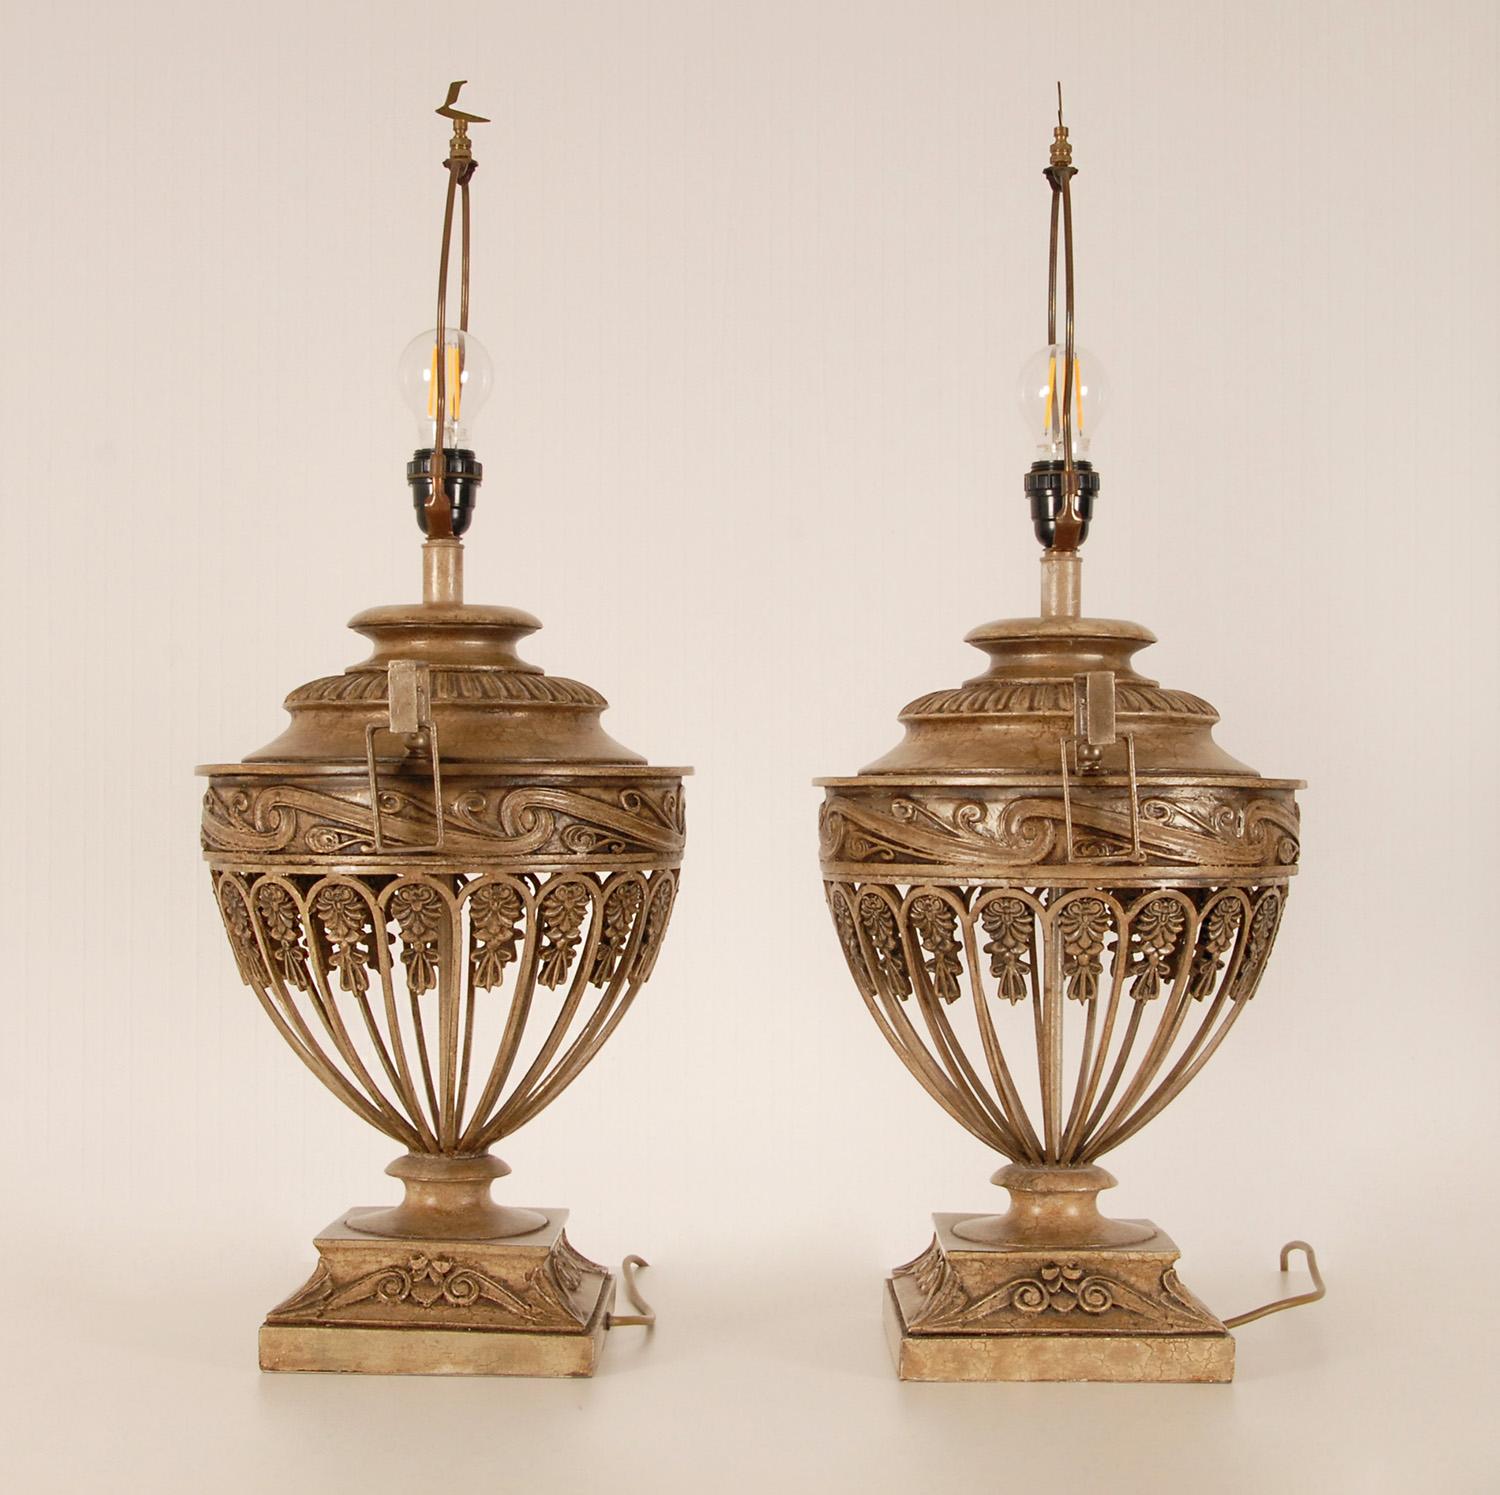 20th Century Vintage 1970s Taupe Iron Neoclassical Lamps Openwork Urns Vase Table Lamps